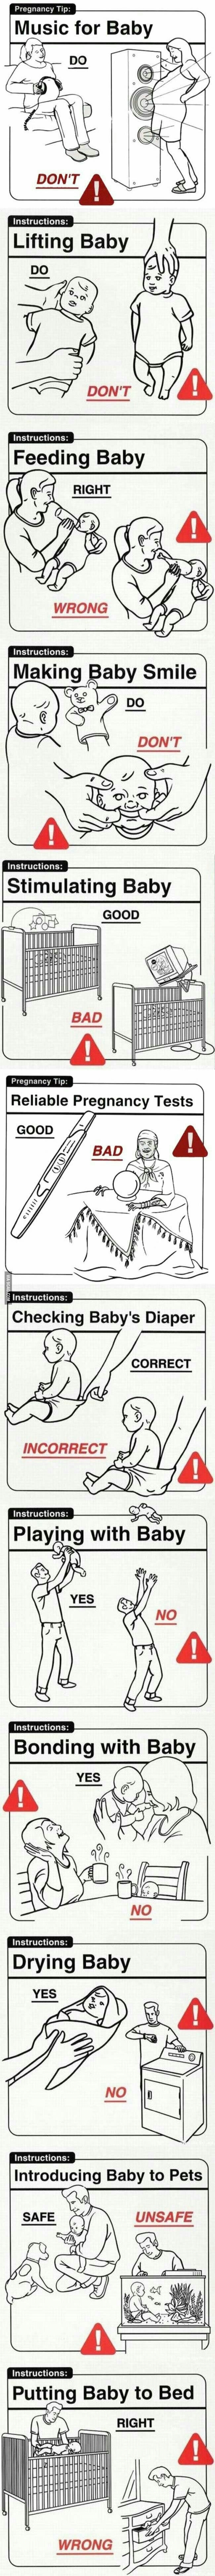 How to parent 